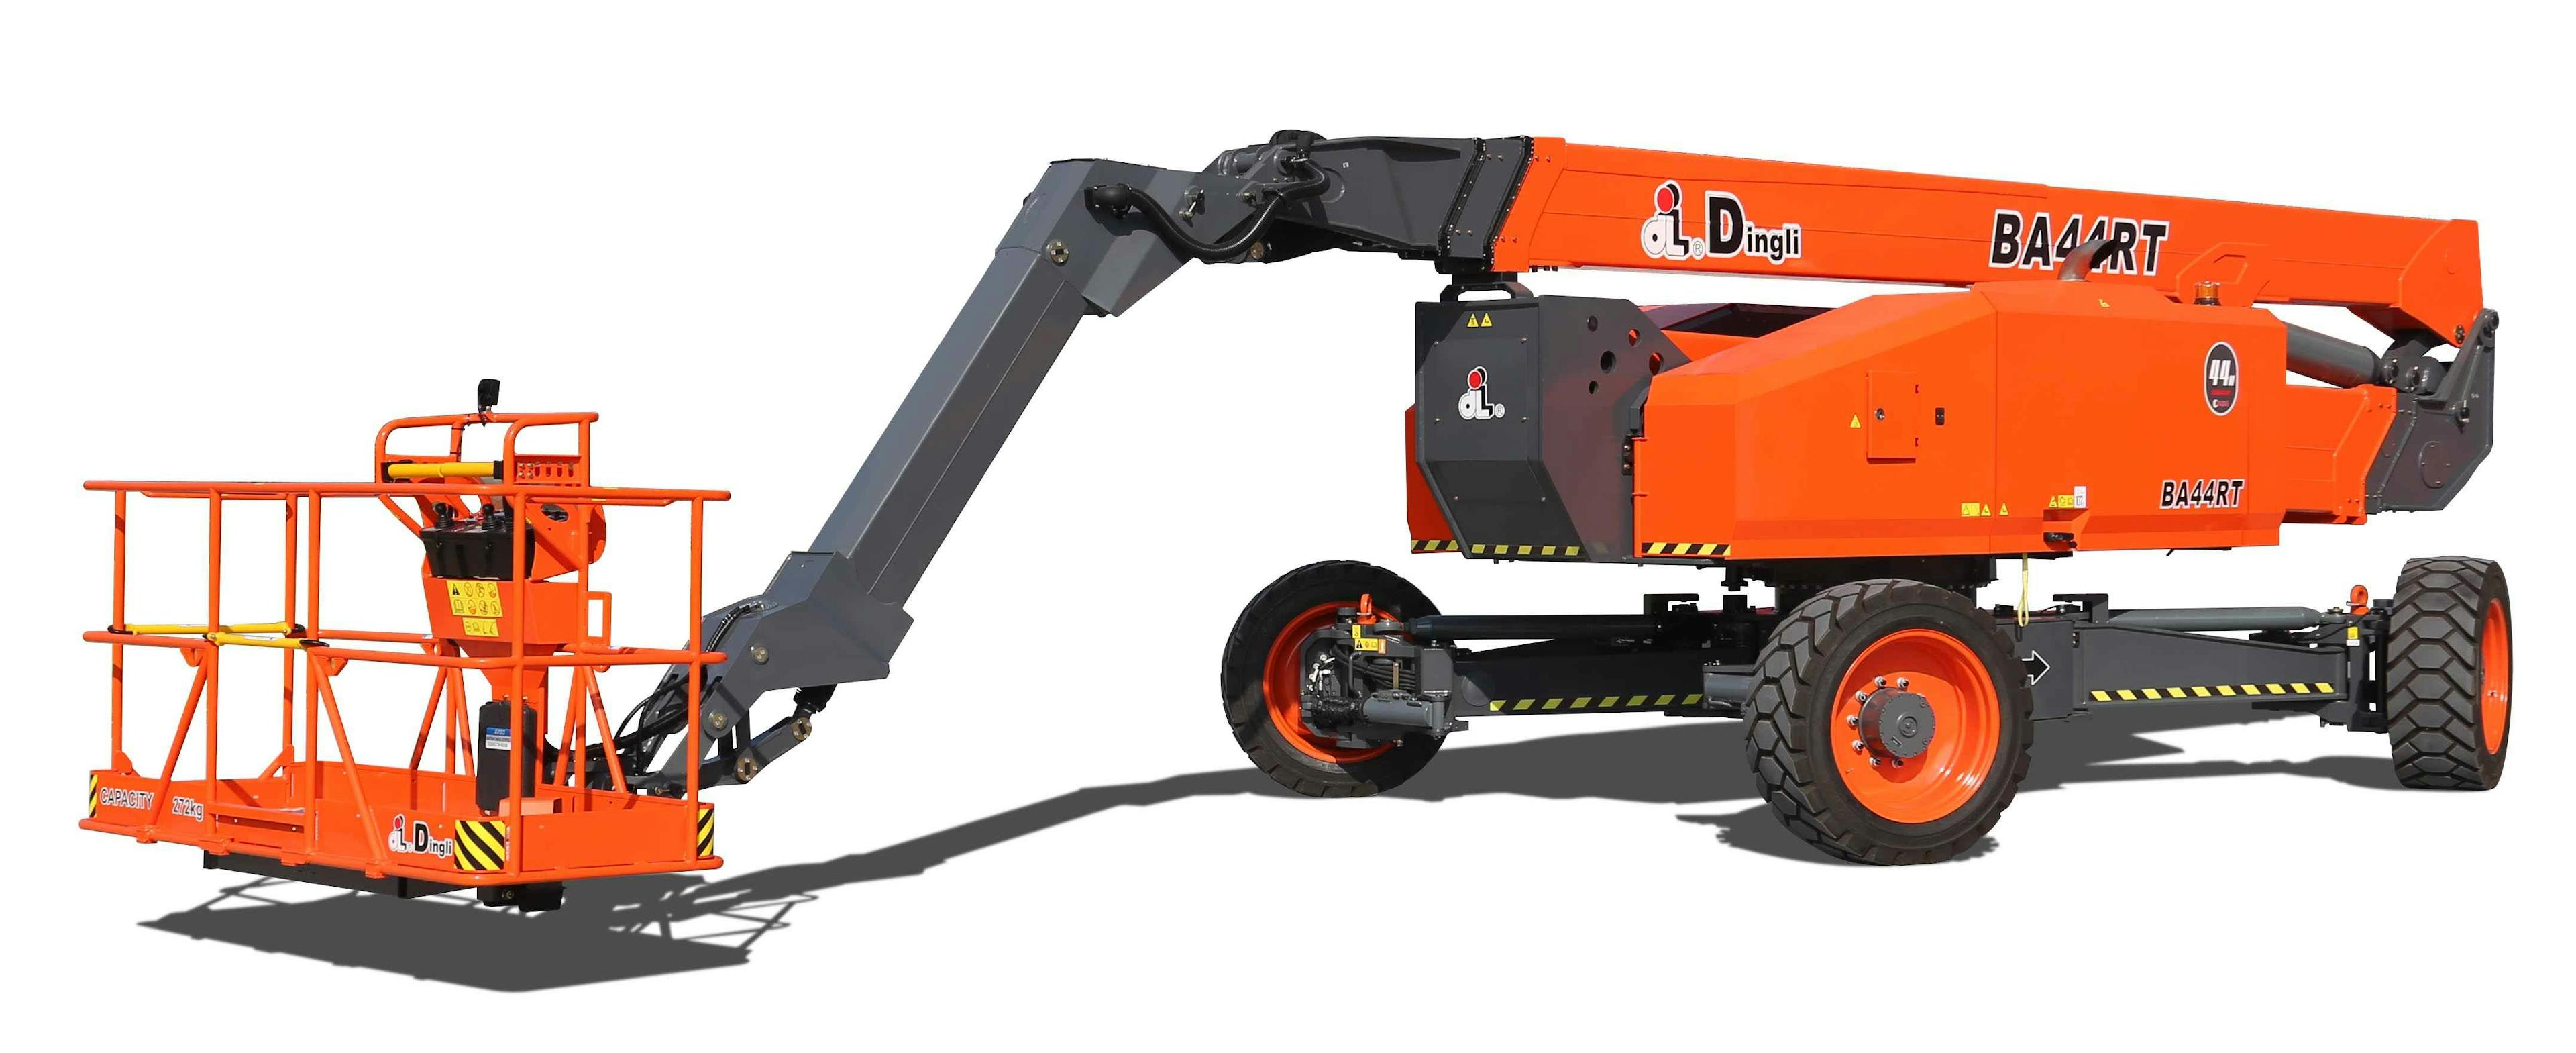 Dingli Launches T Series Modular Articulated Boom Series